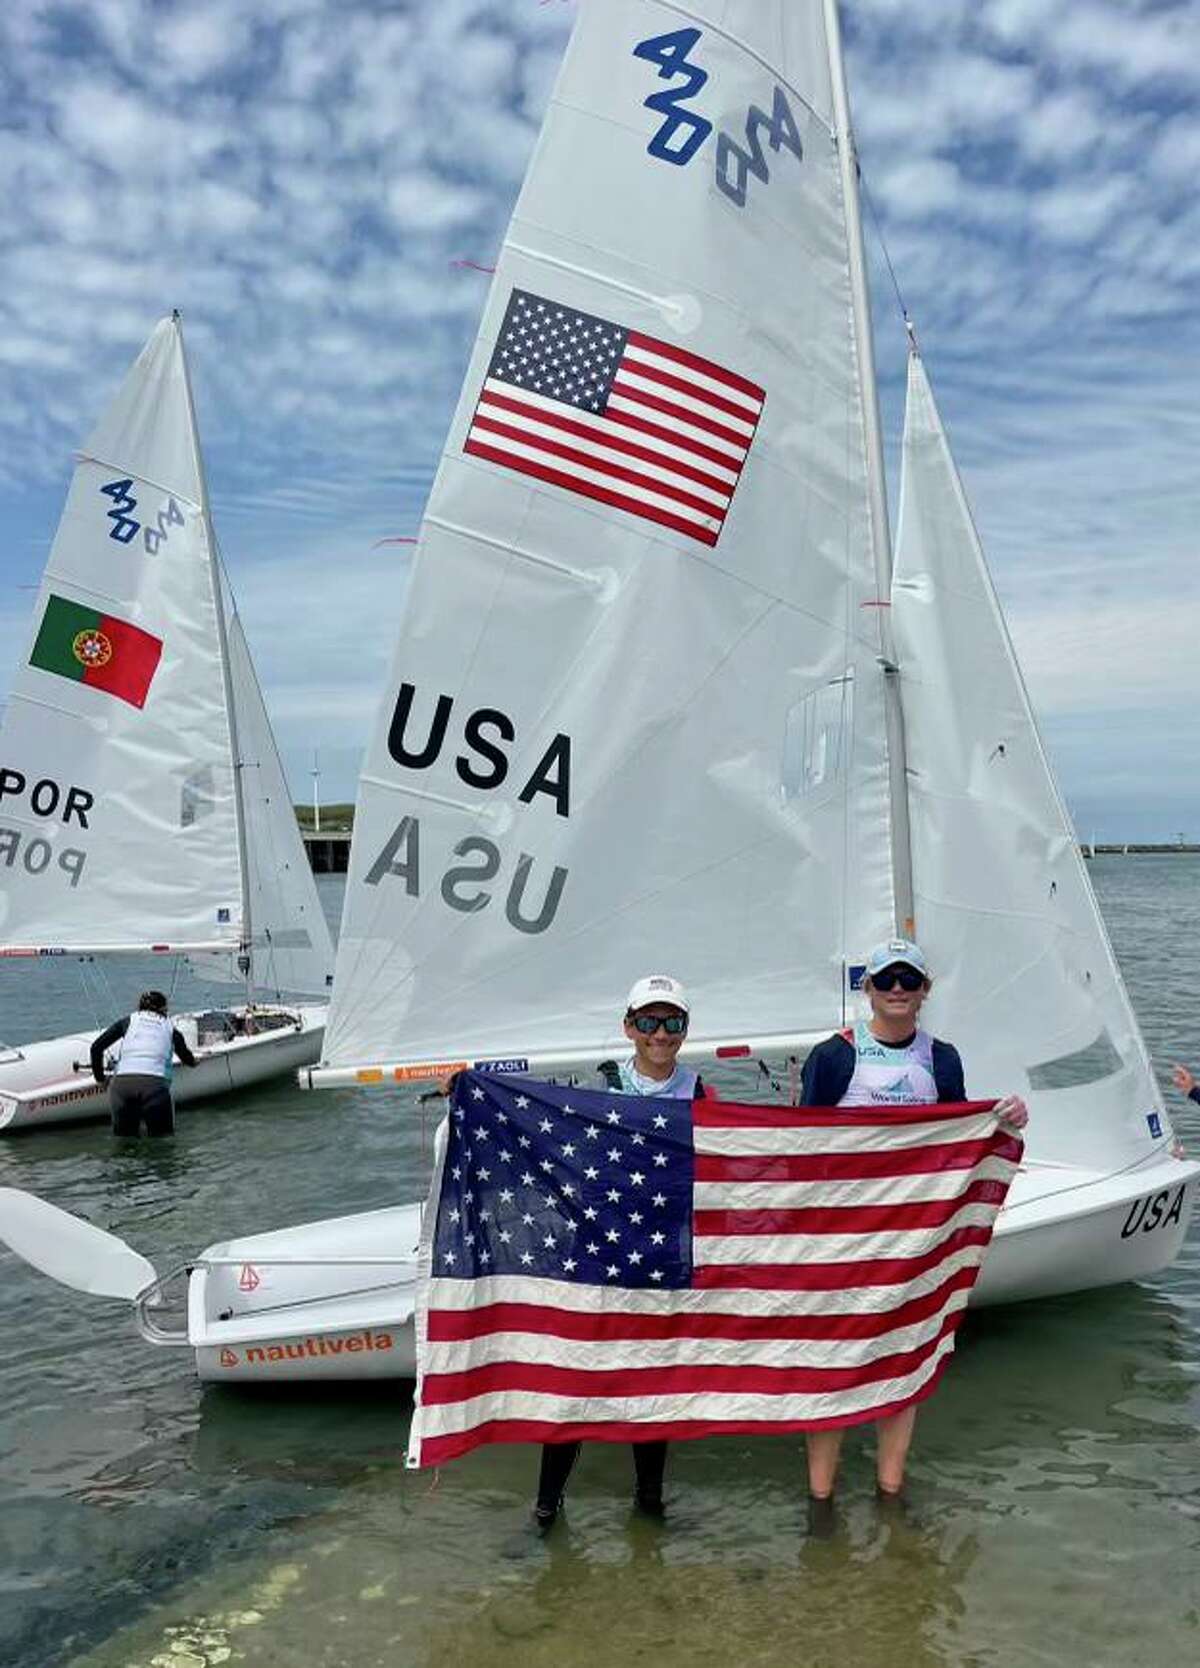 Greenwich residents Freddie Parkin and Asher Beck of Cos Cob, representing the United States in the i420 in the Netherlands, won a gold medal and the International Yacht Youth Sailing World Championship trophy Racing Union earlier this summer.